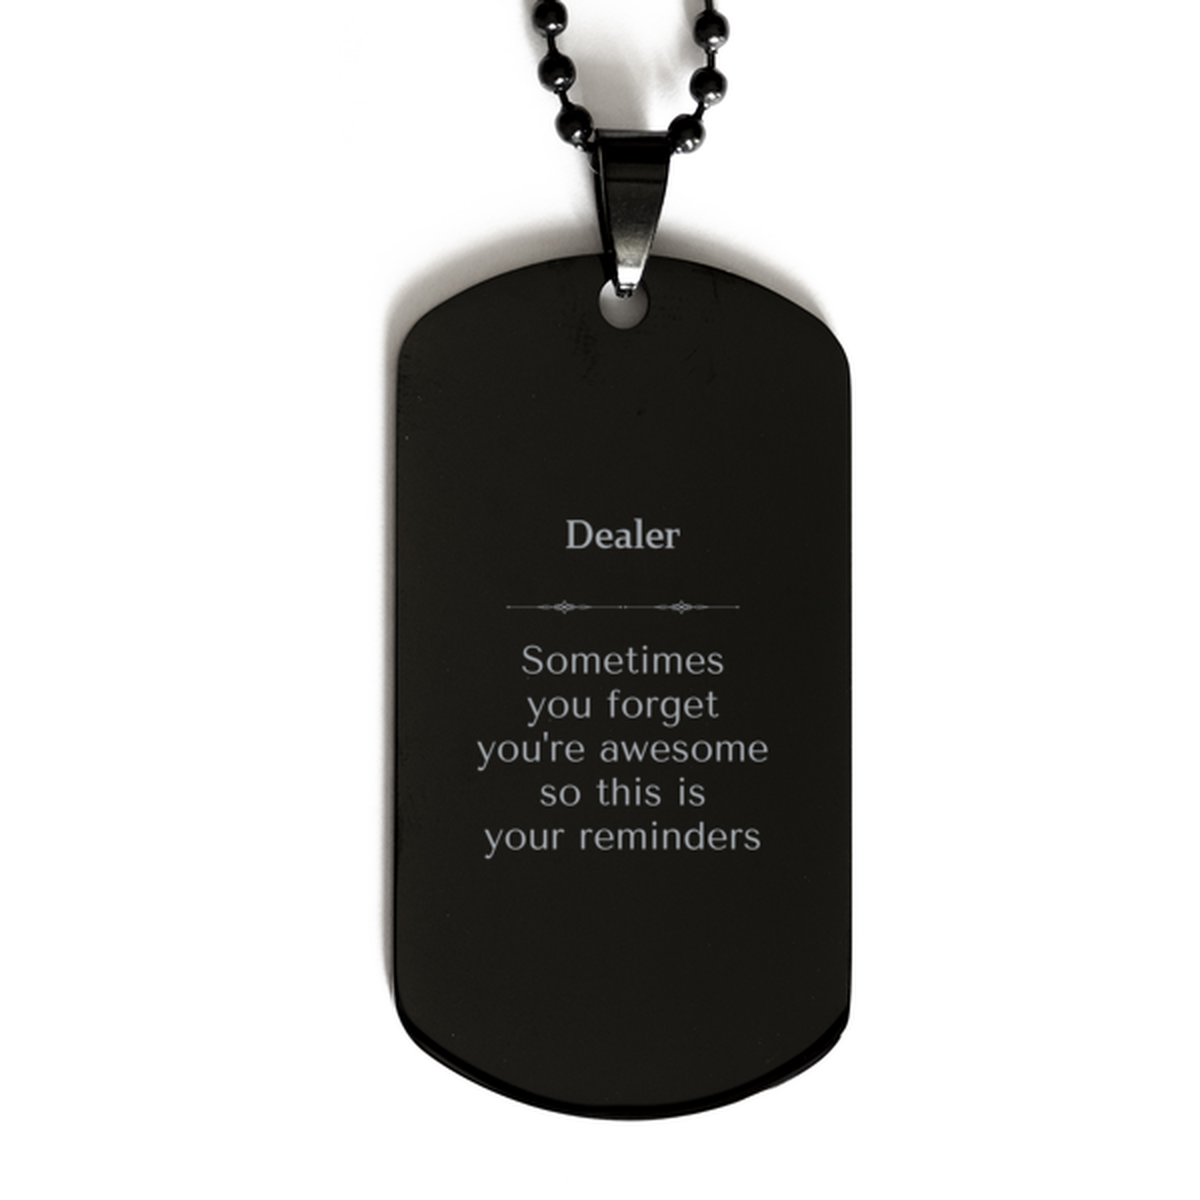 Sentimental Dealer Black Dog Tag, Dealer Sometimes you forget you're awesome so this is your reminders, Graduation Christmas Birthday Gifts for Dealer, Men, Women, Coworkers